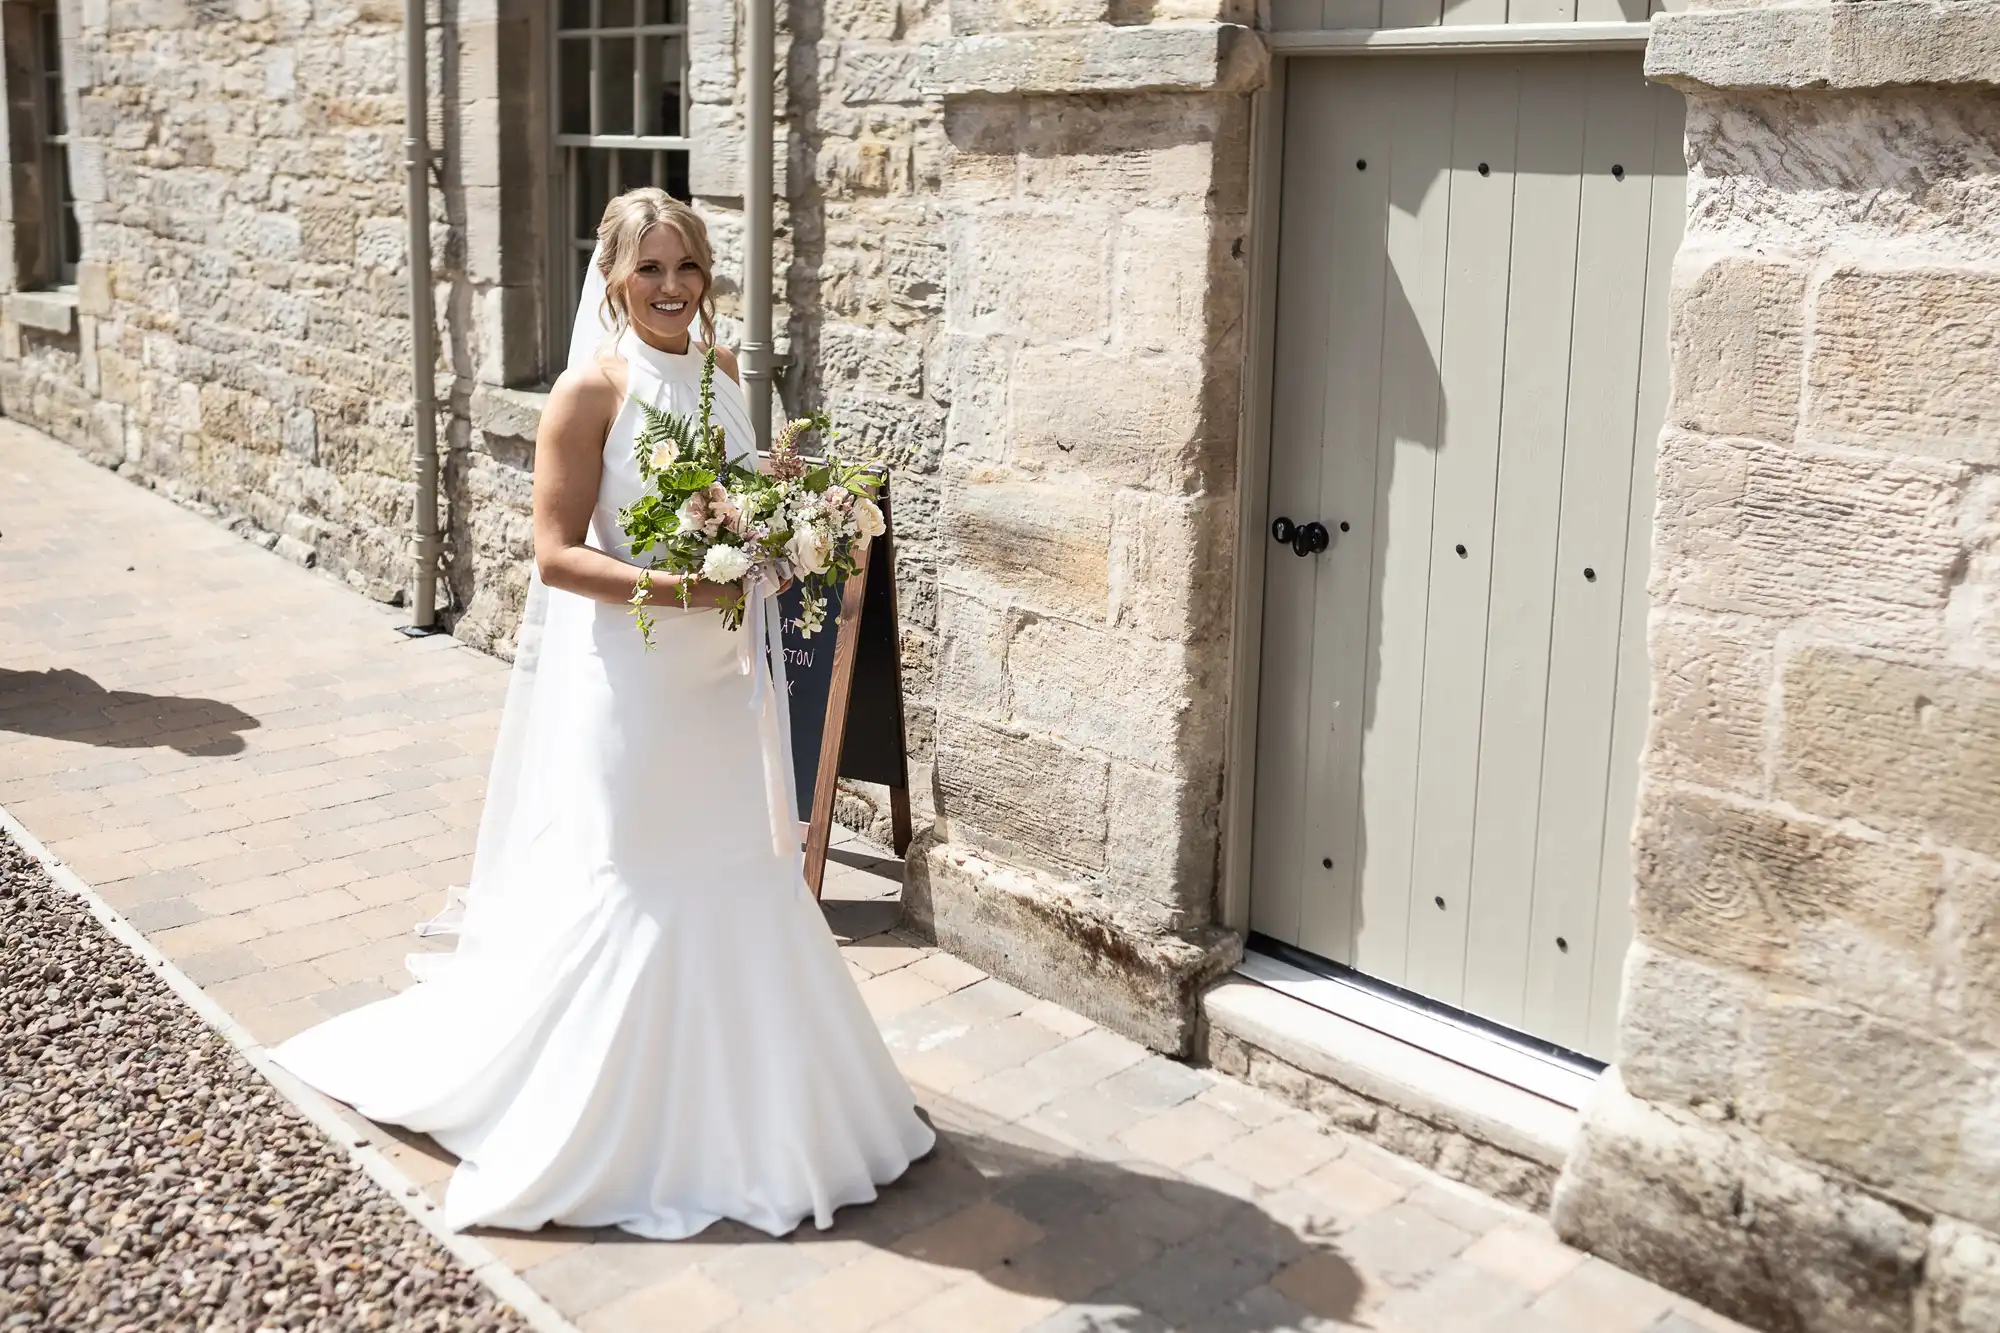 A bride in a white dress holding a bouquet, smiling next to a stone building with a pale green door.